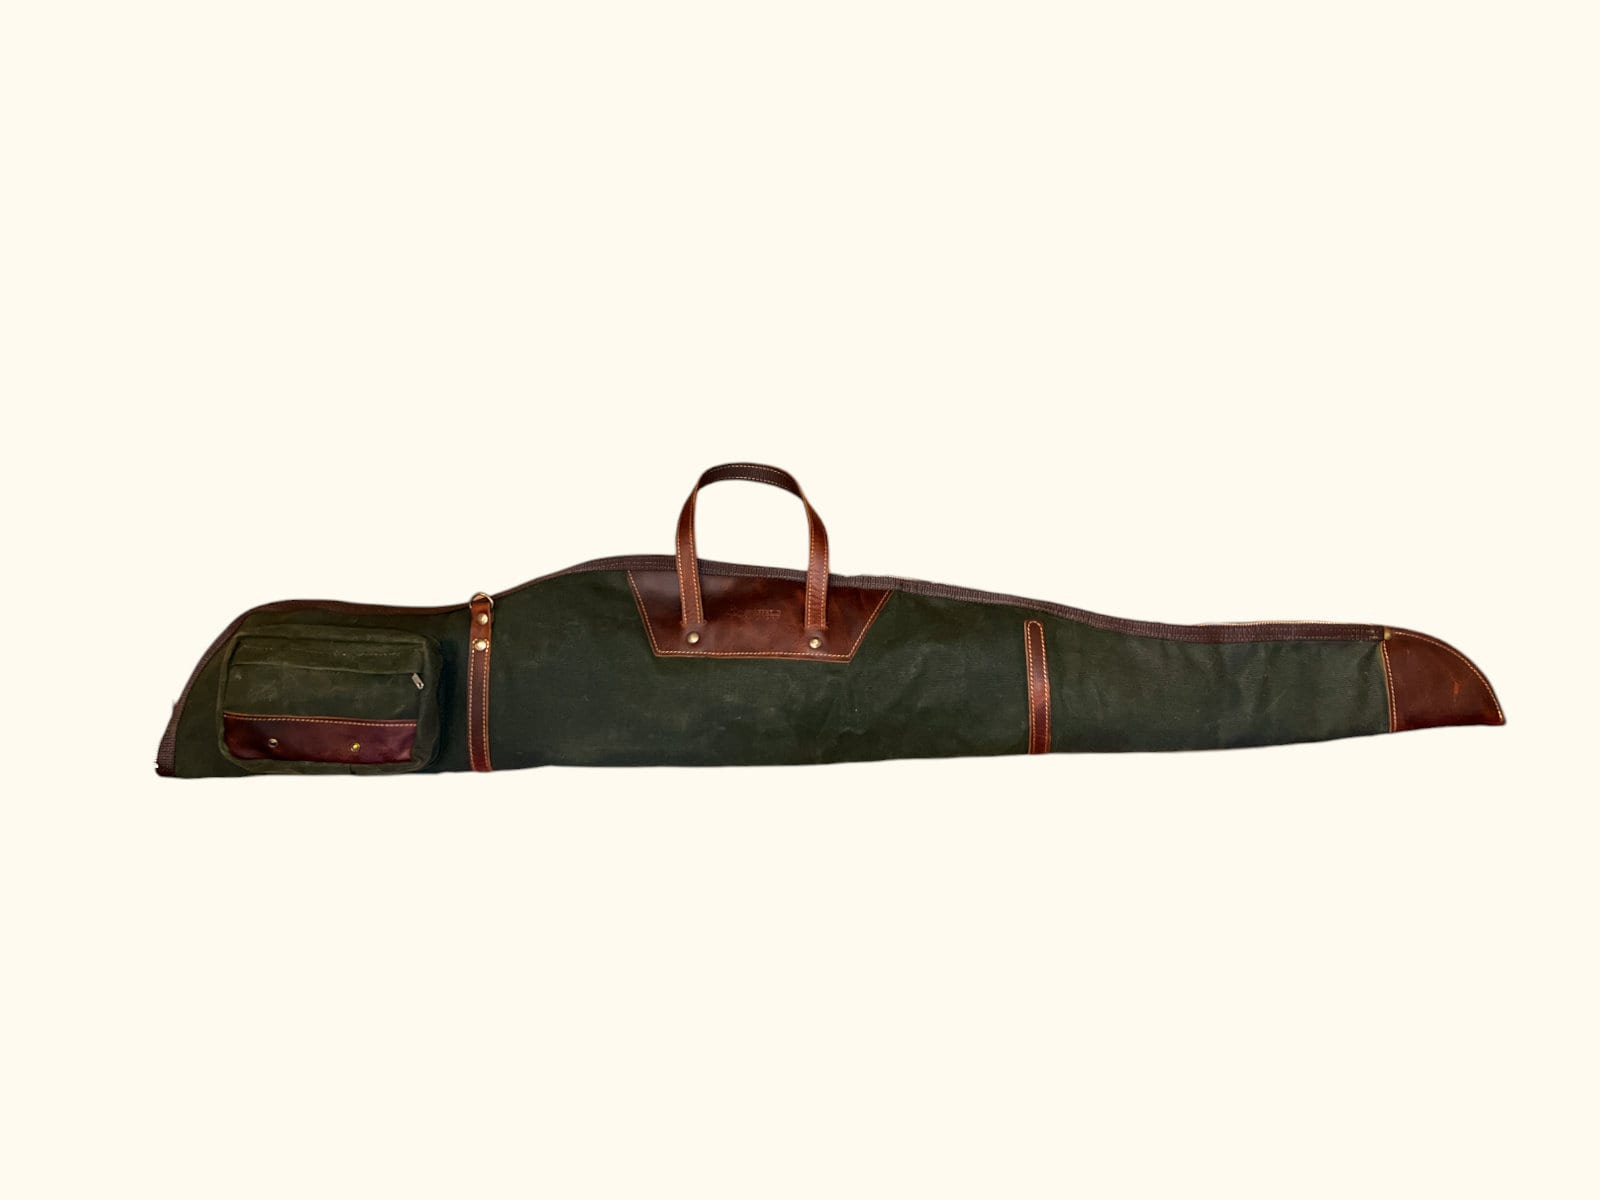 40 inch to 60 inch | Handmade | Leather Rifle Bag | Canvas Rifle Bag | Waxed Canvas  | Leather | Rifle Bag | Hunting | Rifle | Gun case  | Personalization  99percenthandmade   